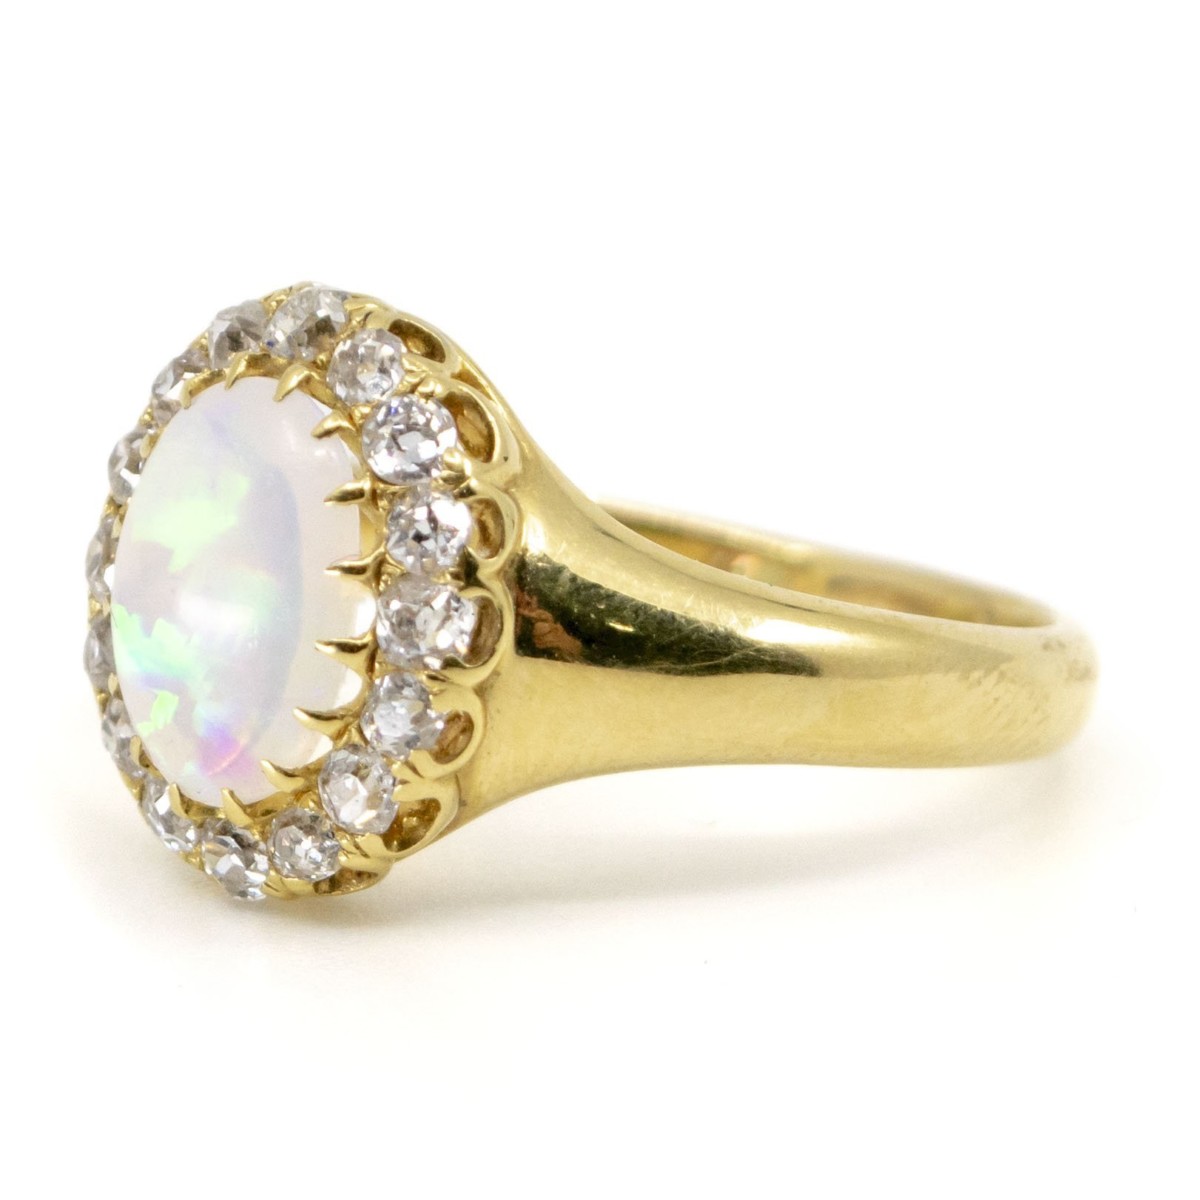 Antique Victorian Opal and Diamond Ring - Jewellery Discovery